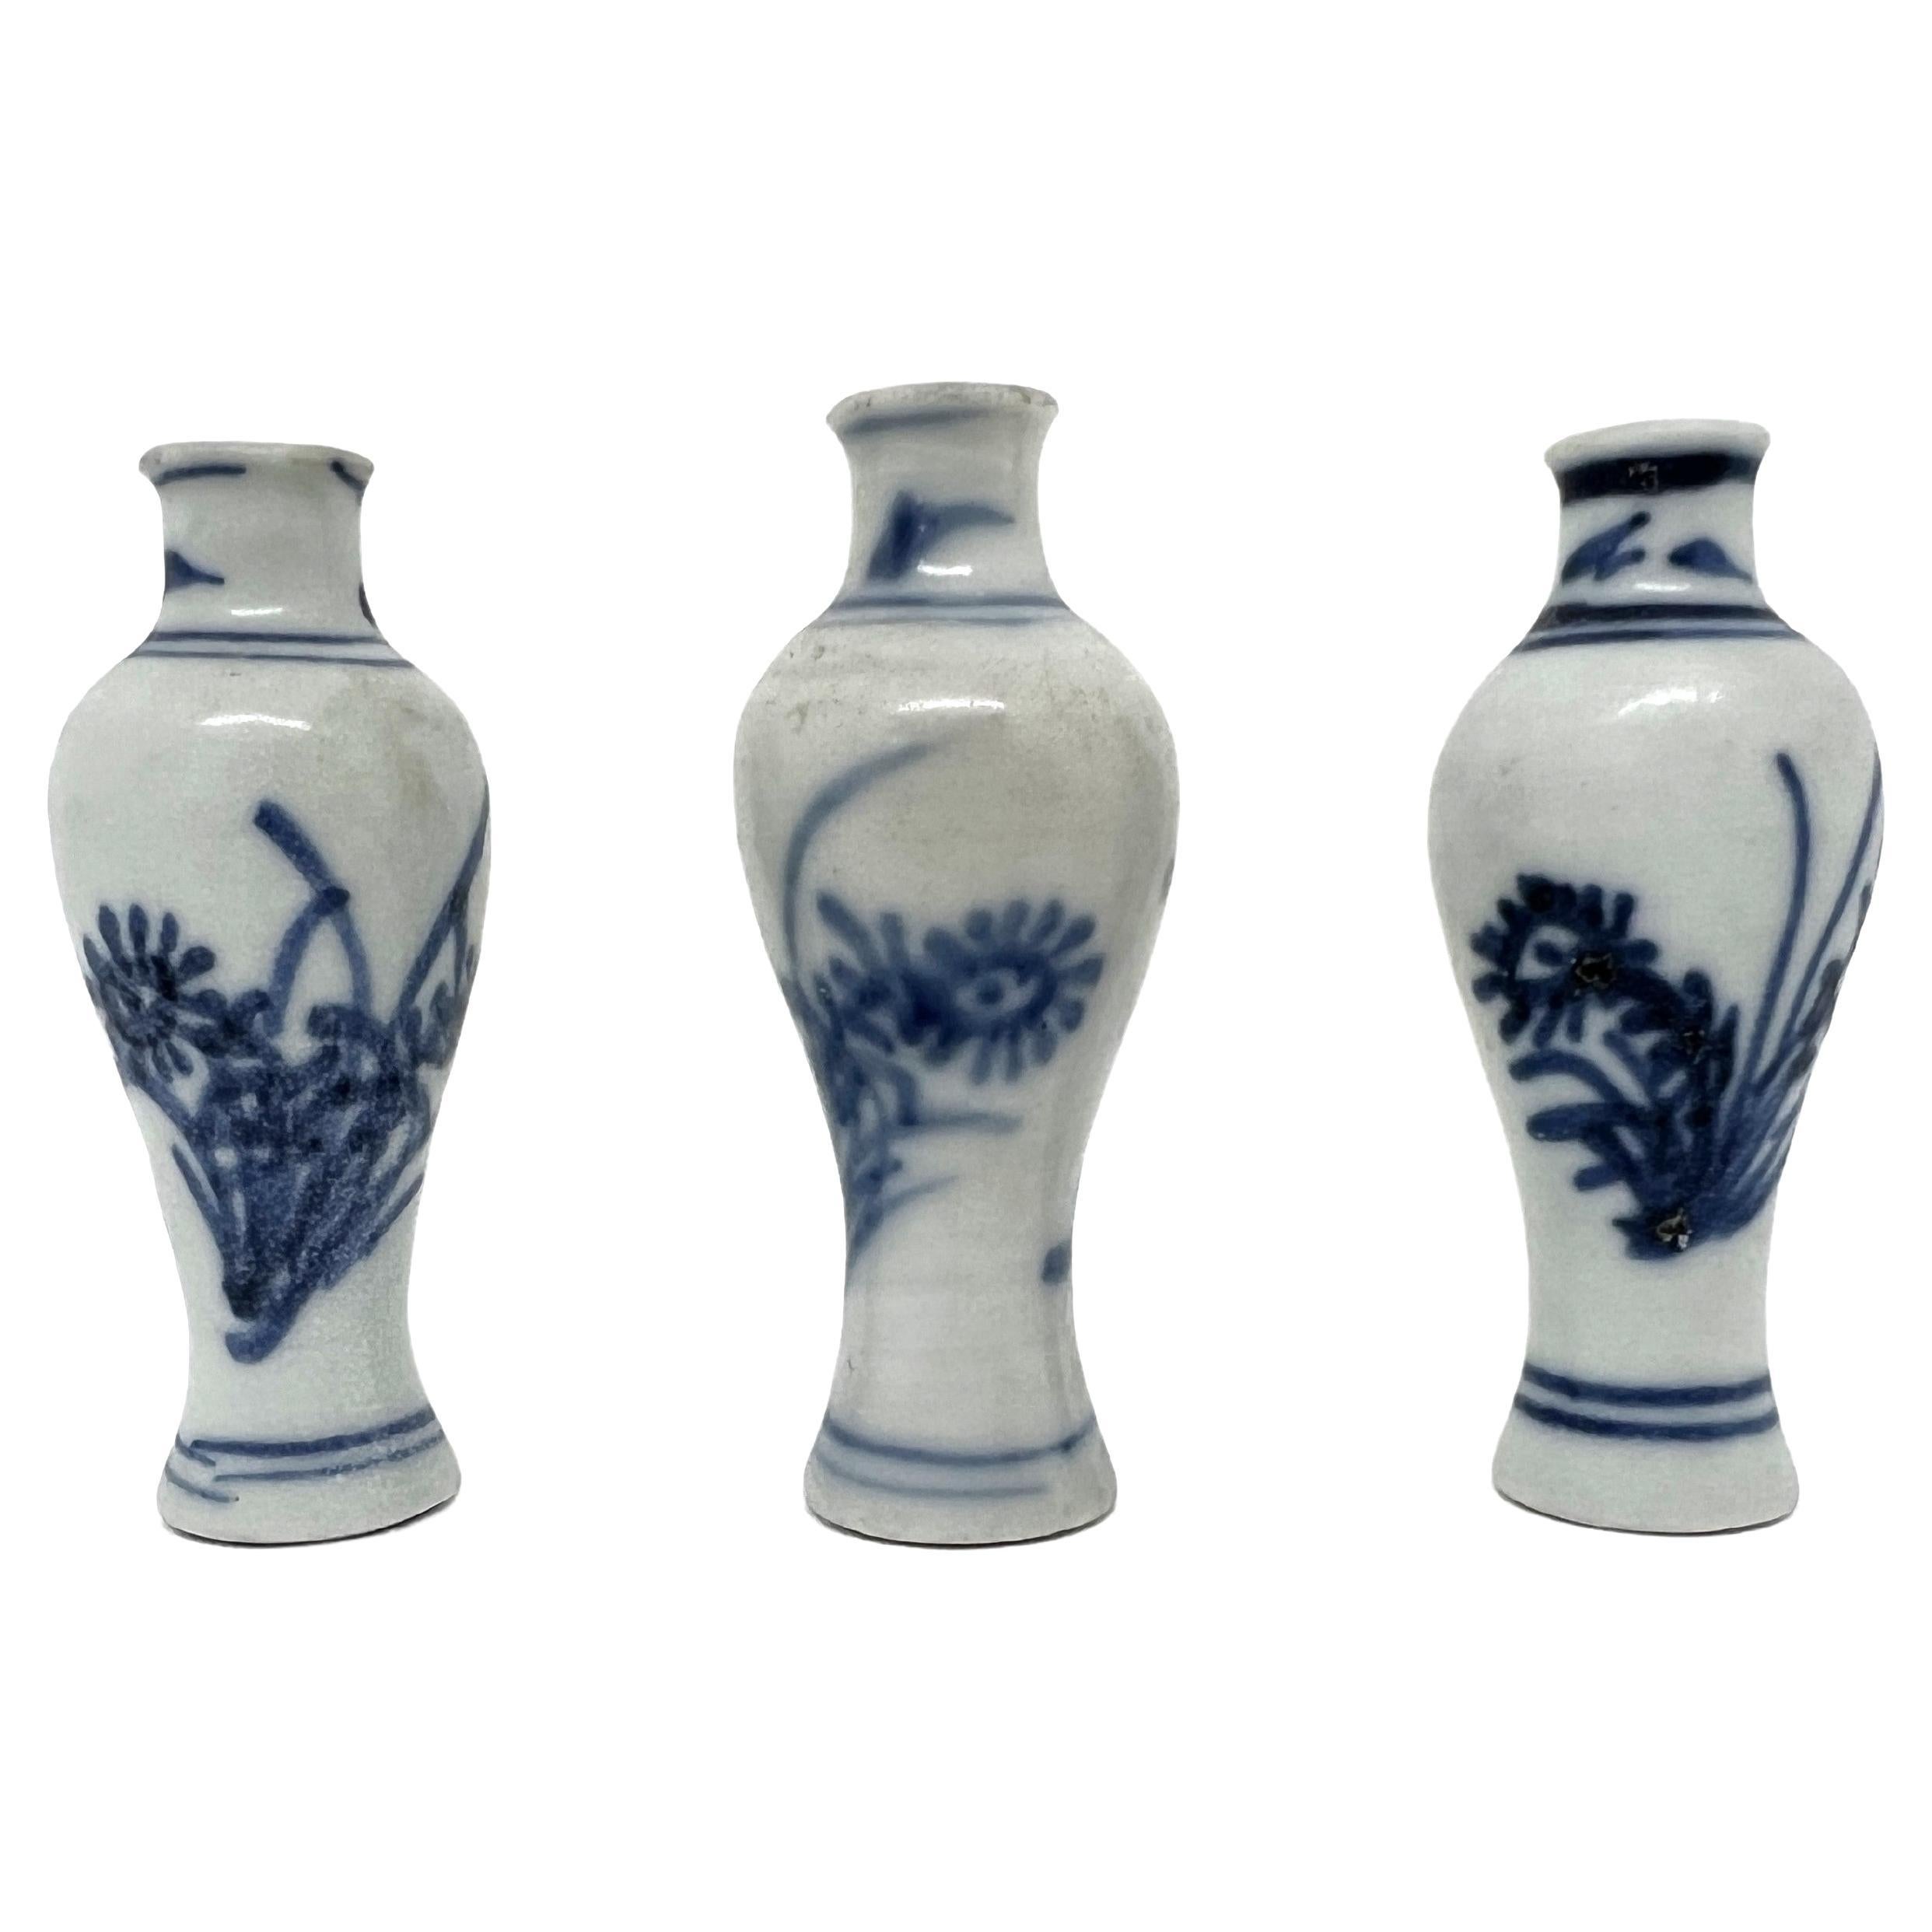 Three Blue and White Miniature Vases Set, C 1725, Qing Dynasty, Yongzheng Era For Sale